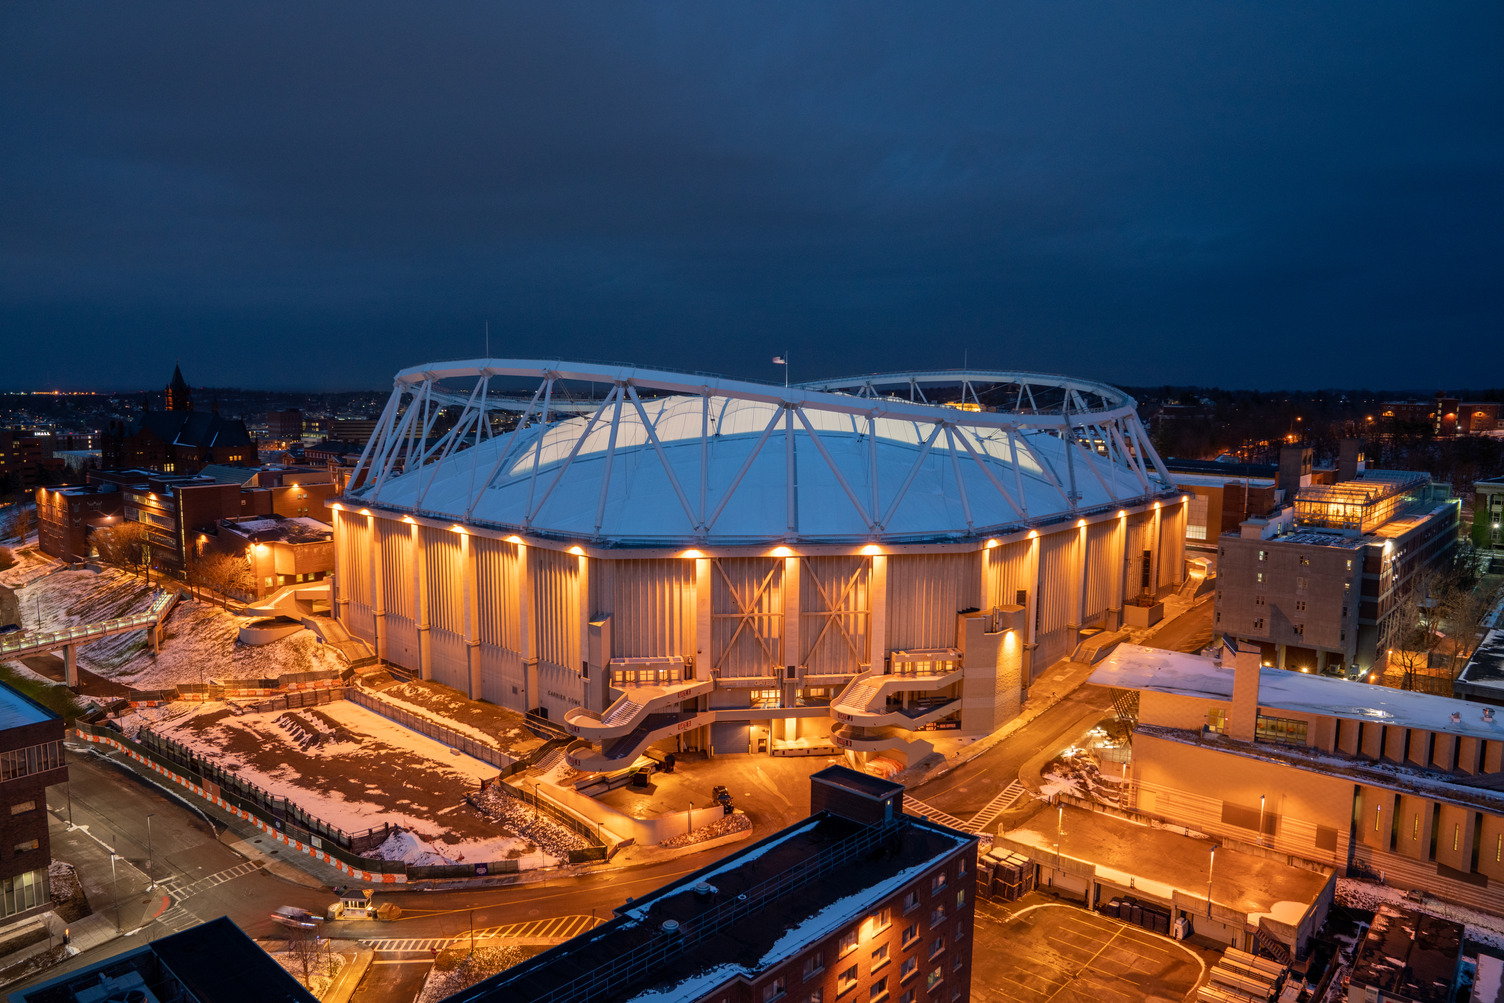 A nighttime photo of the stadium at Syracuse University with the City of Syracuse skyline in the background.